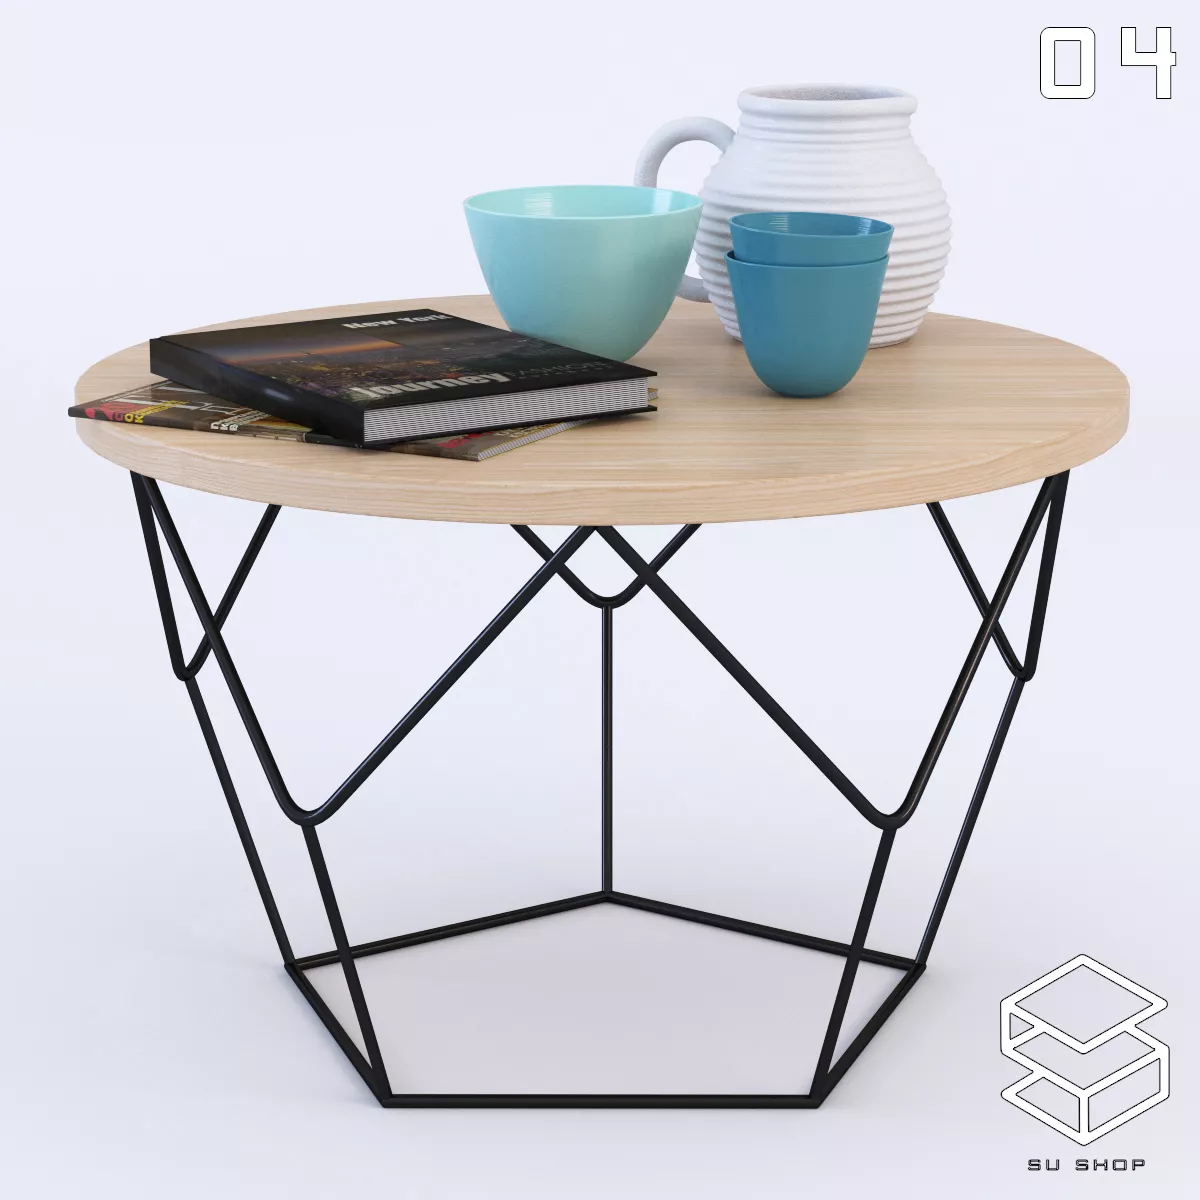 MODERN TEA TABLE - SKETCHUP 3D MODEL - VRAY OR ENSCAPE - ID15049